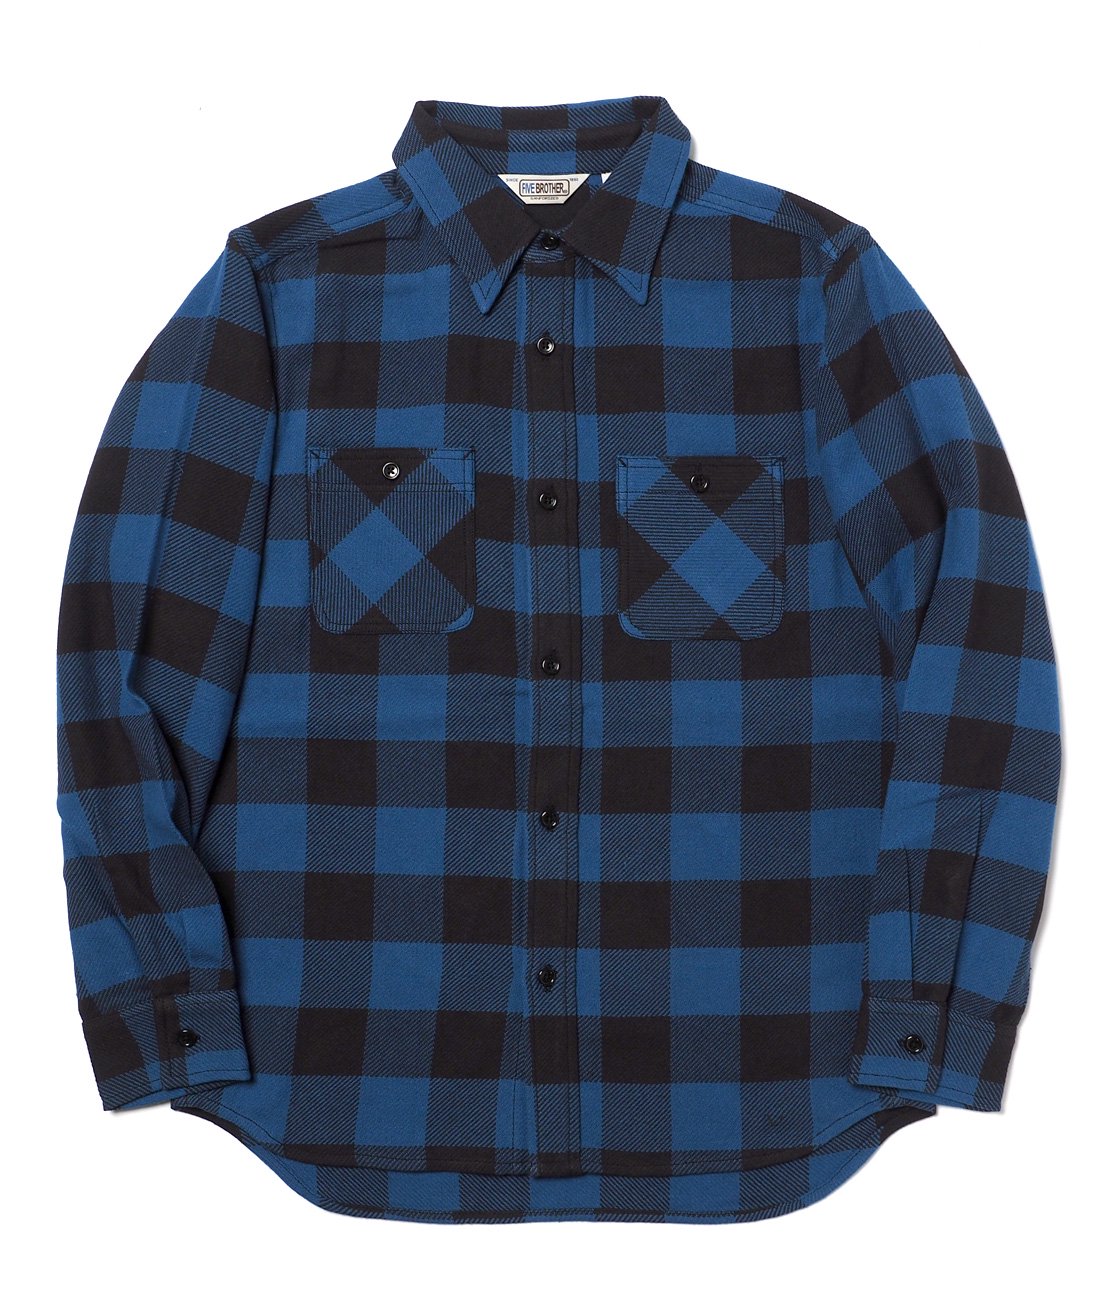 FIVE BROTHER】HEAVY FLANNEL WORK SHIRT - BLUE BUFFALO